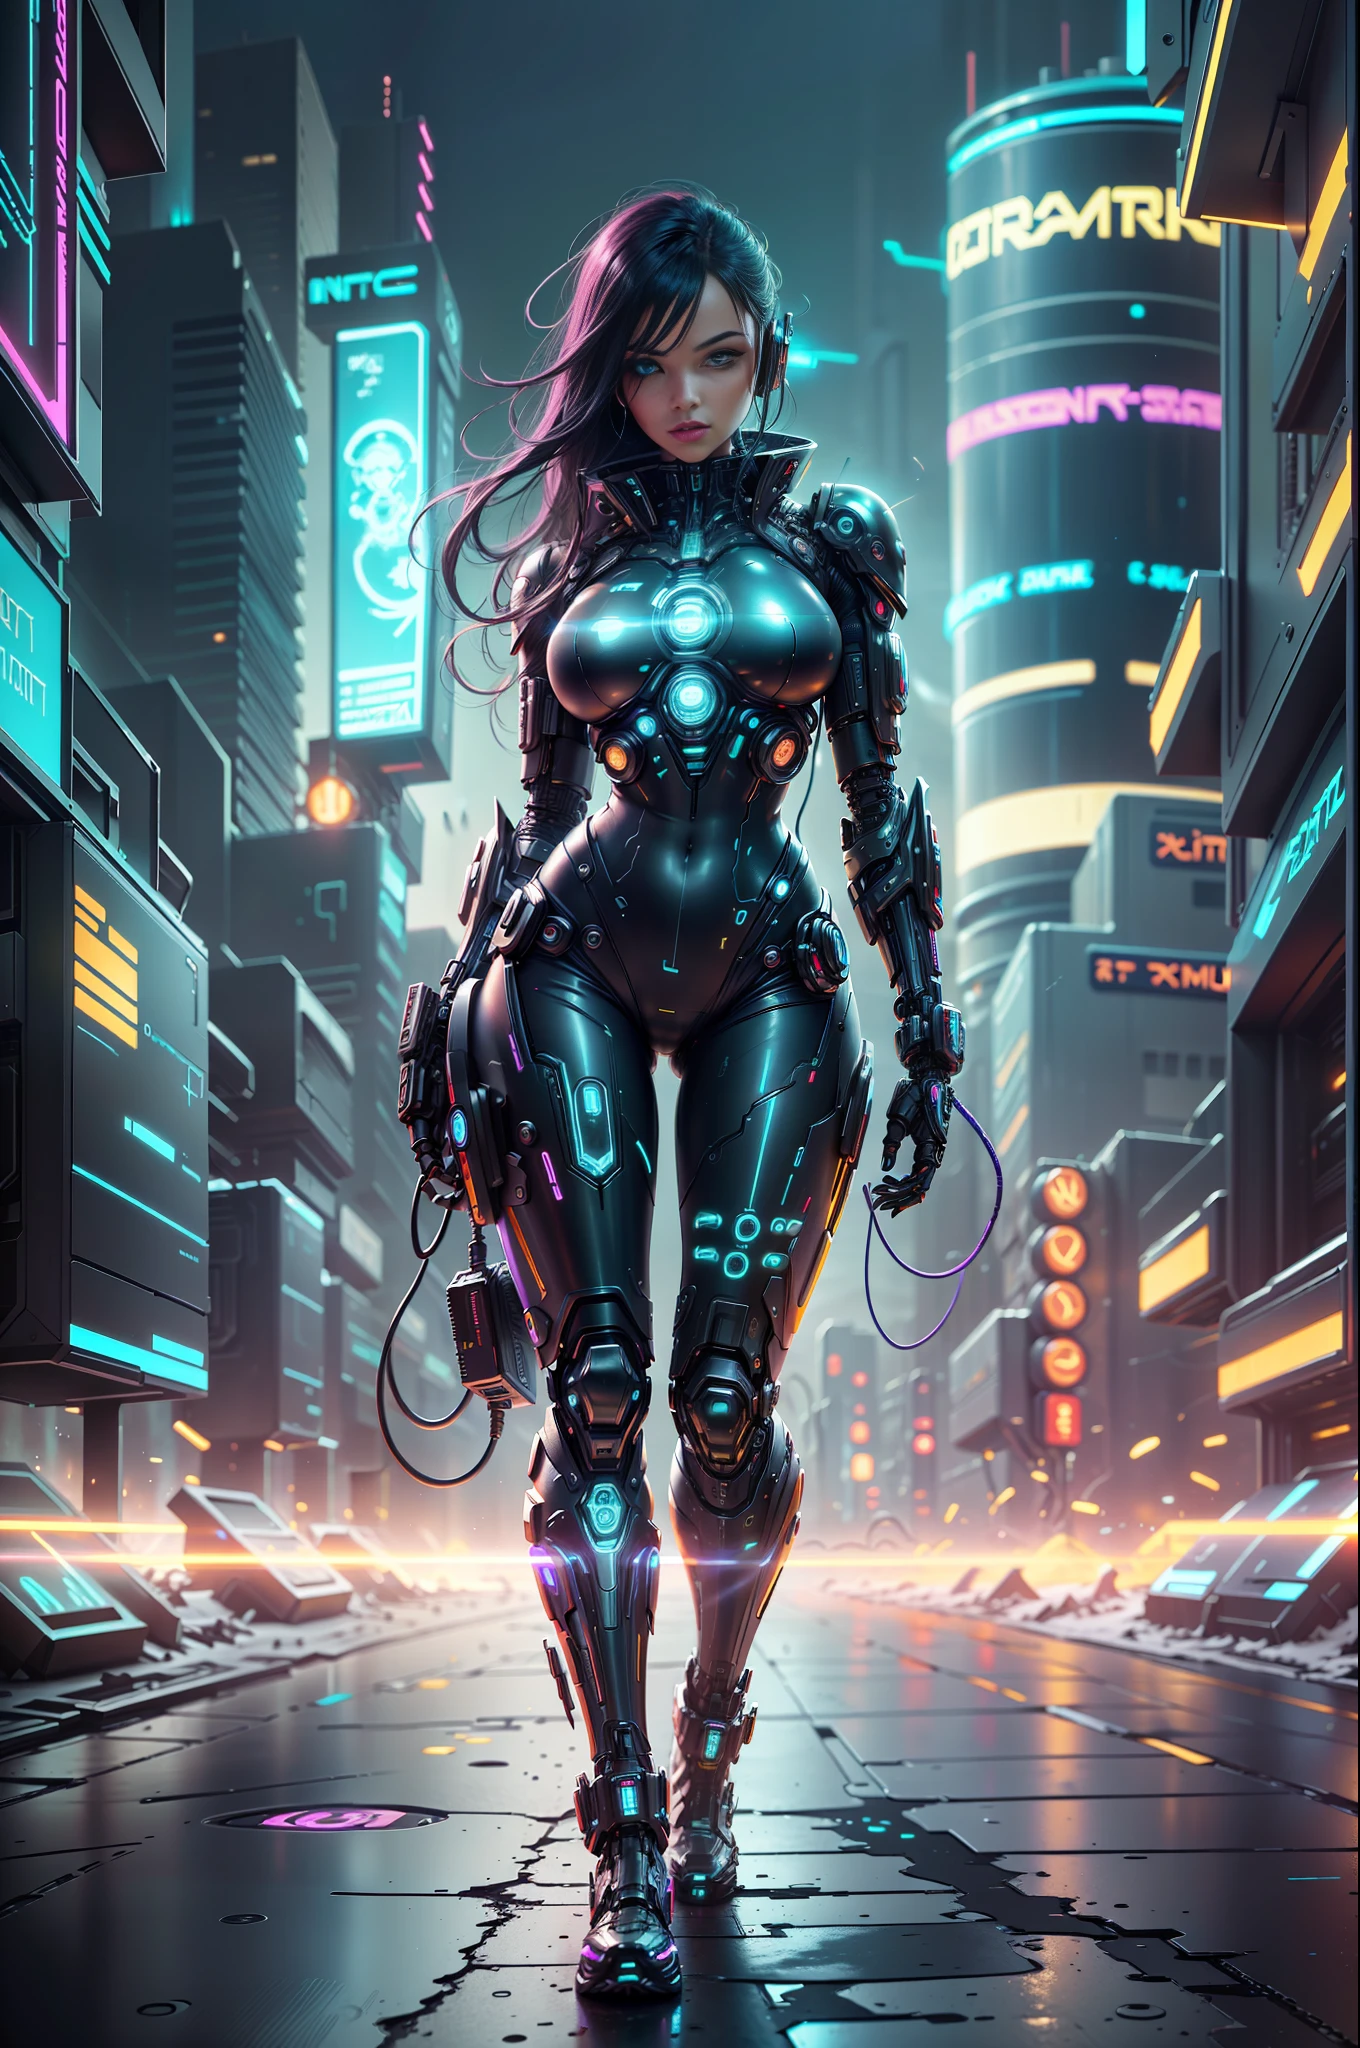 Cyber Woman in a Futuristic Cyberpunk CityAn imposing cyberpunk woman, with a full body on display, is depicted in a futuristic cyberpunk city. His eyes sparkle with intense neon, reflecting the cityscape filled with dystopian skyscrapers, holographic advertisements and flying vehicles amid a night sky lit by vibrant neons. The cybernetic woman sports a shiny metallic skin, covered in intricate cybernetic details and circuit tattoos. His posture is confident and challenging --auto --s2